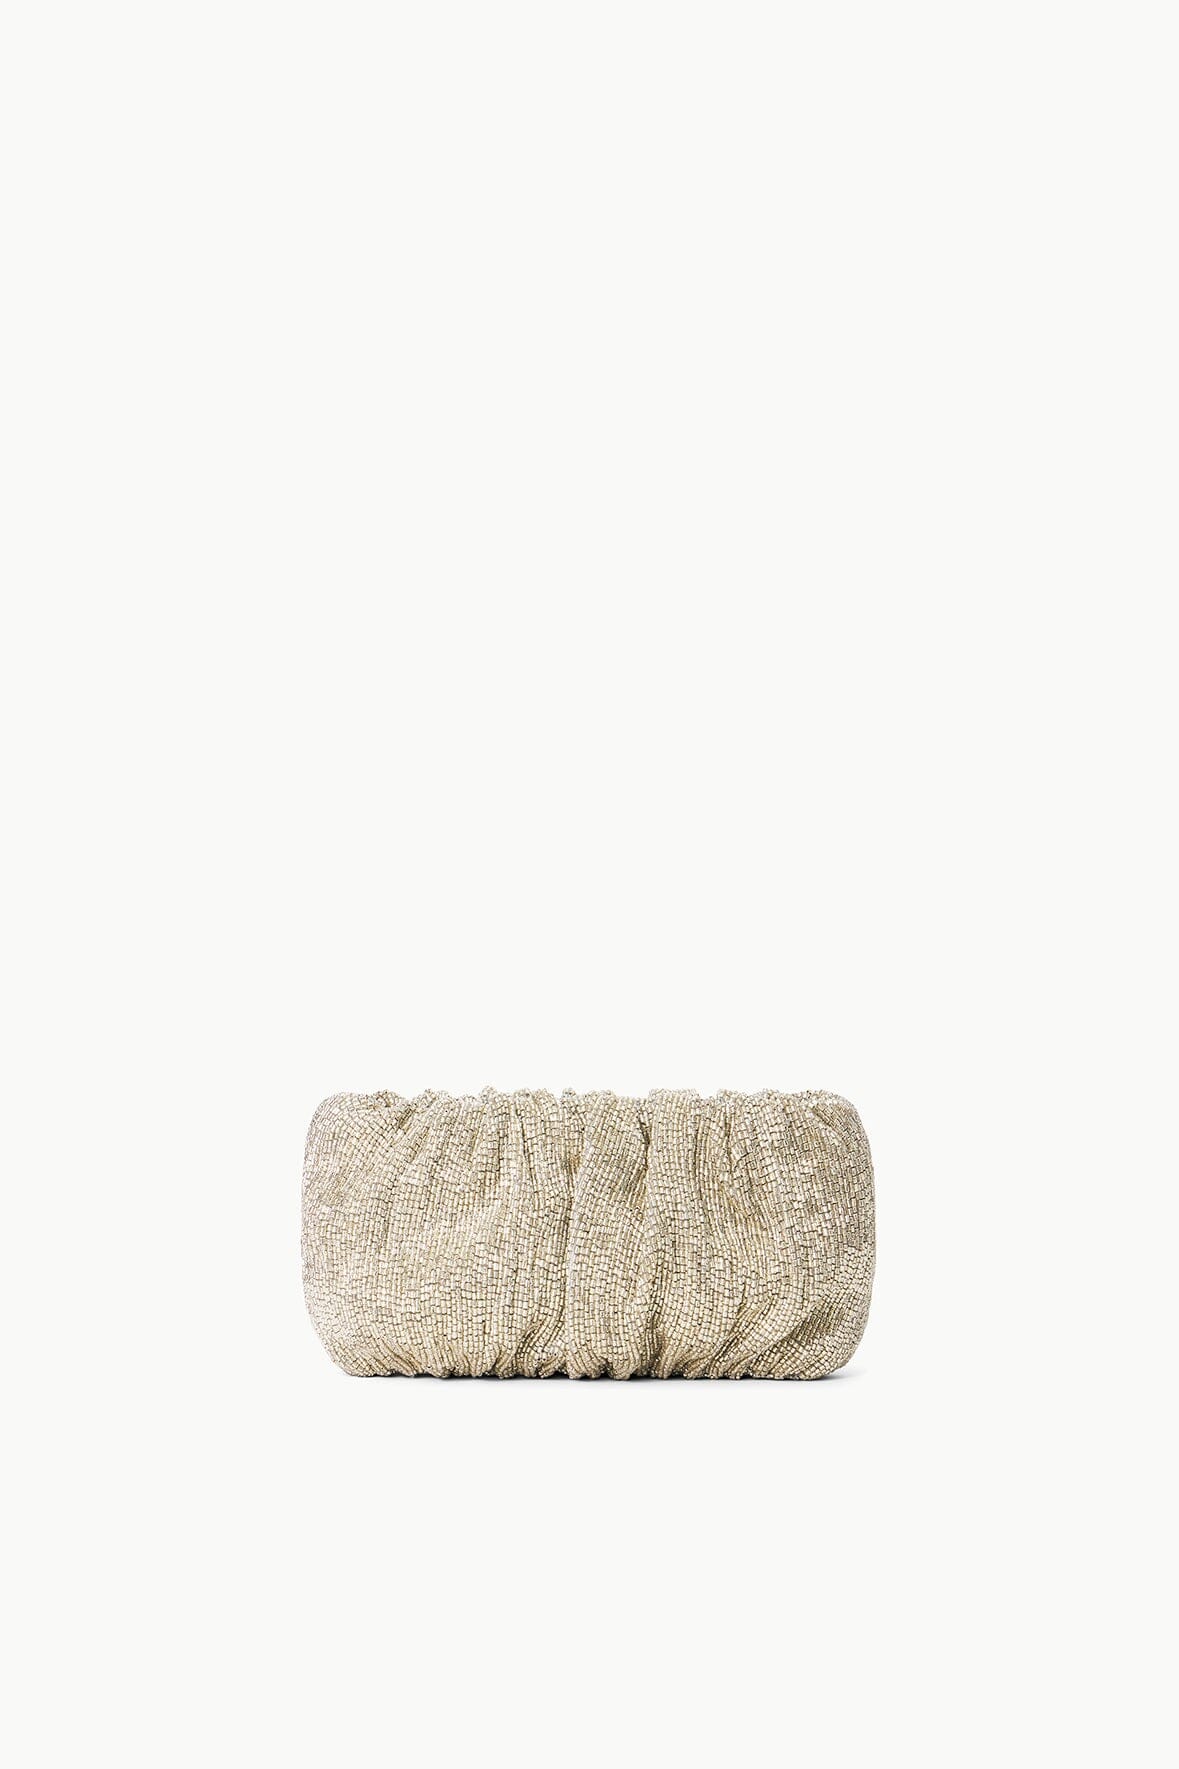 STAUD Beaded Bean Convertible Clutch in White